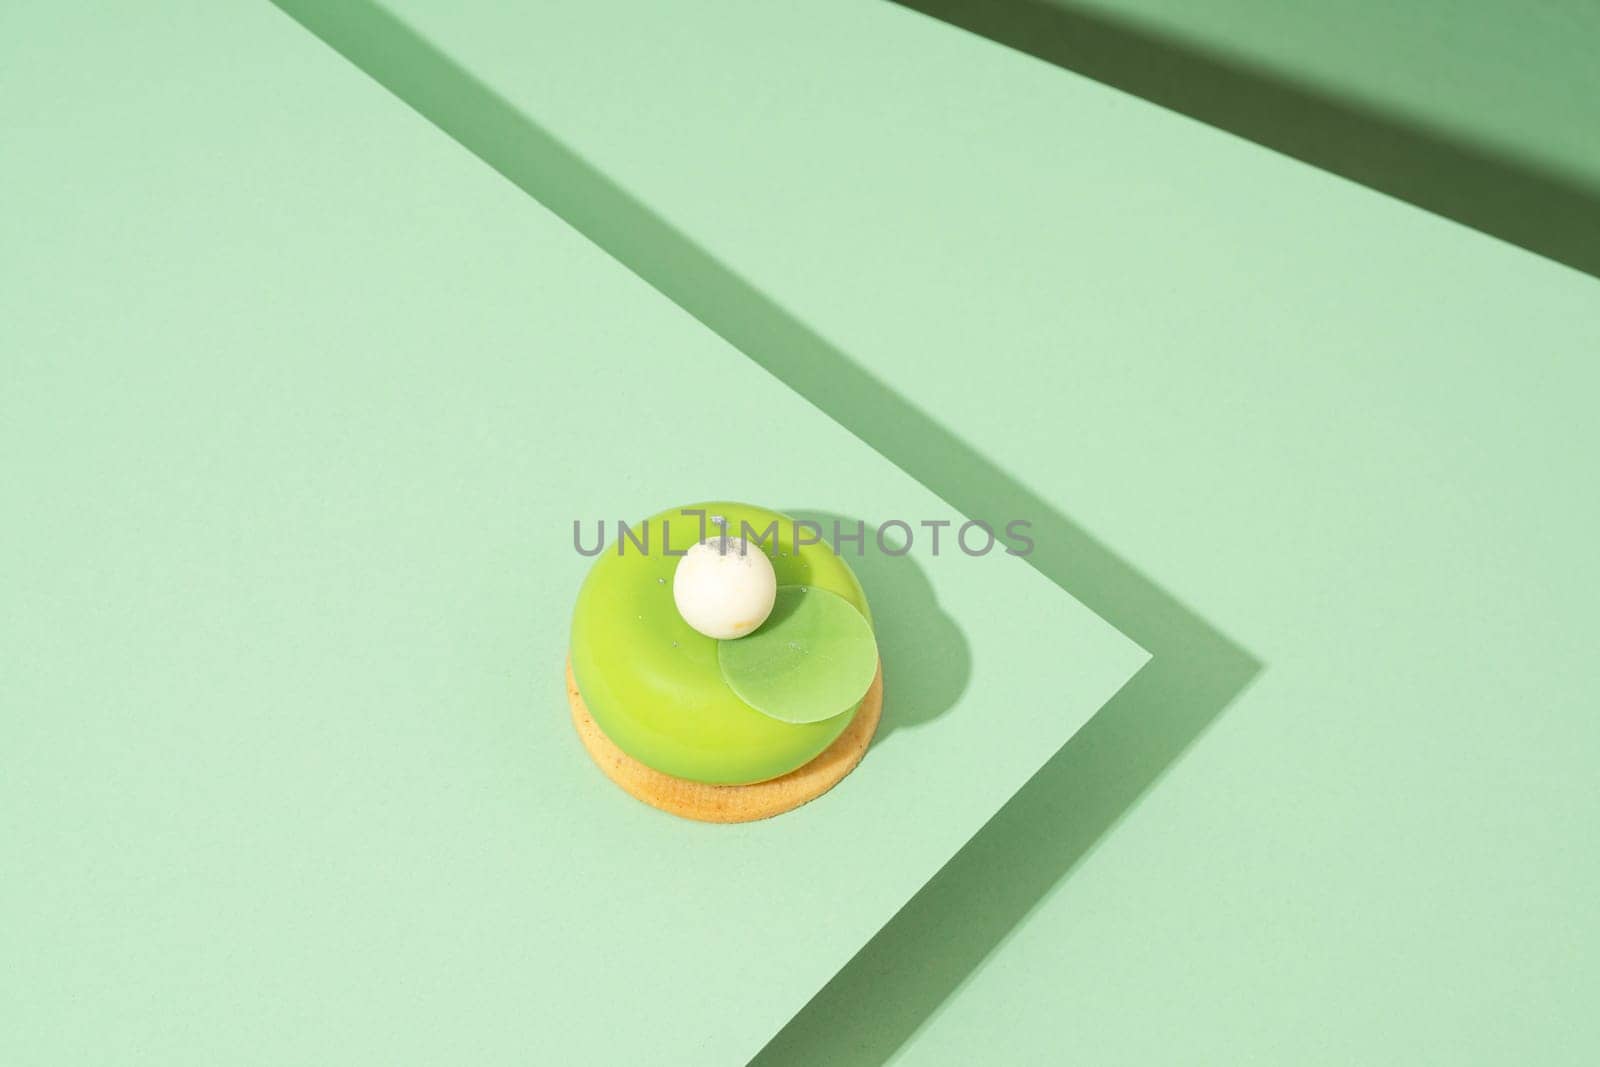 A freshly baked pastry with green and white icing, sitting atop a green-hued surface by A_Karim